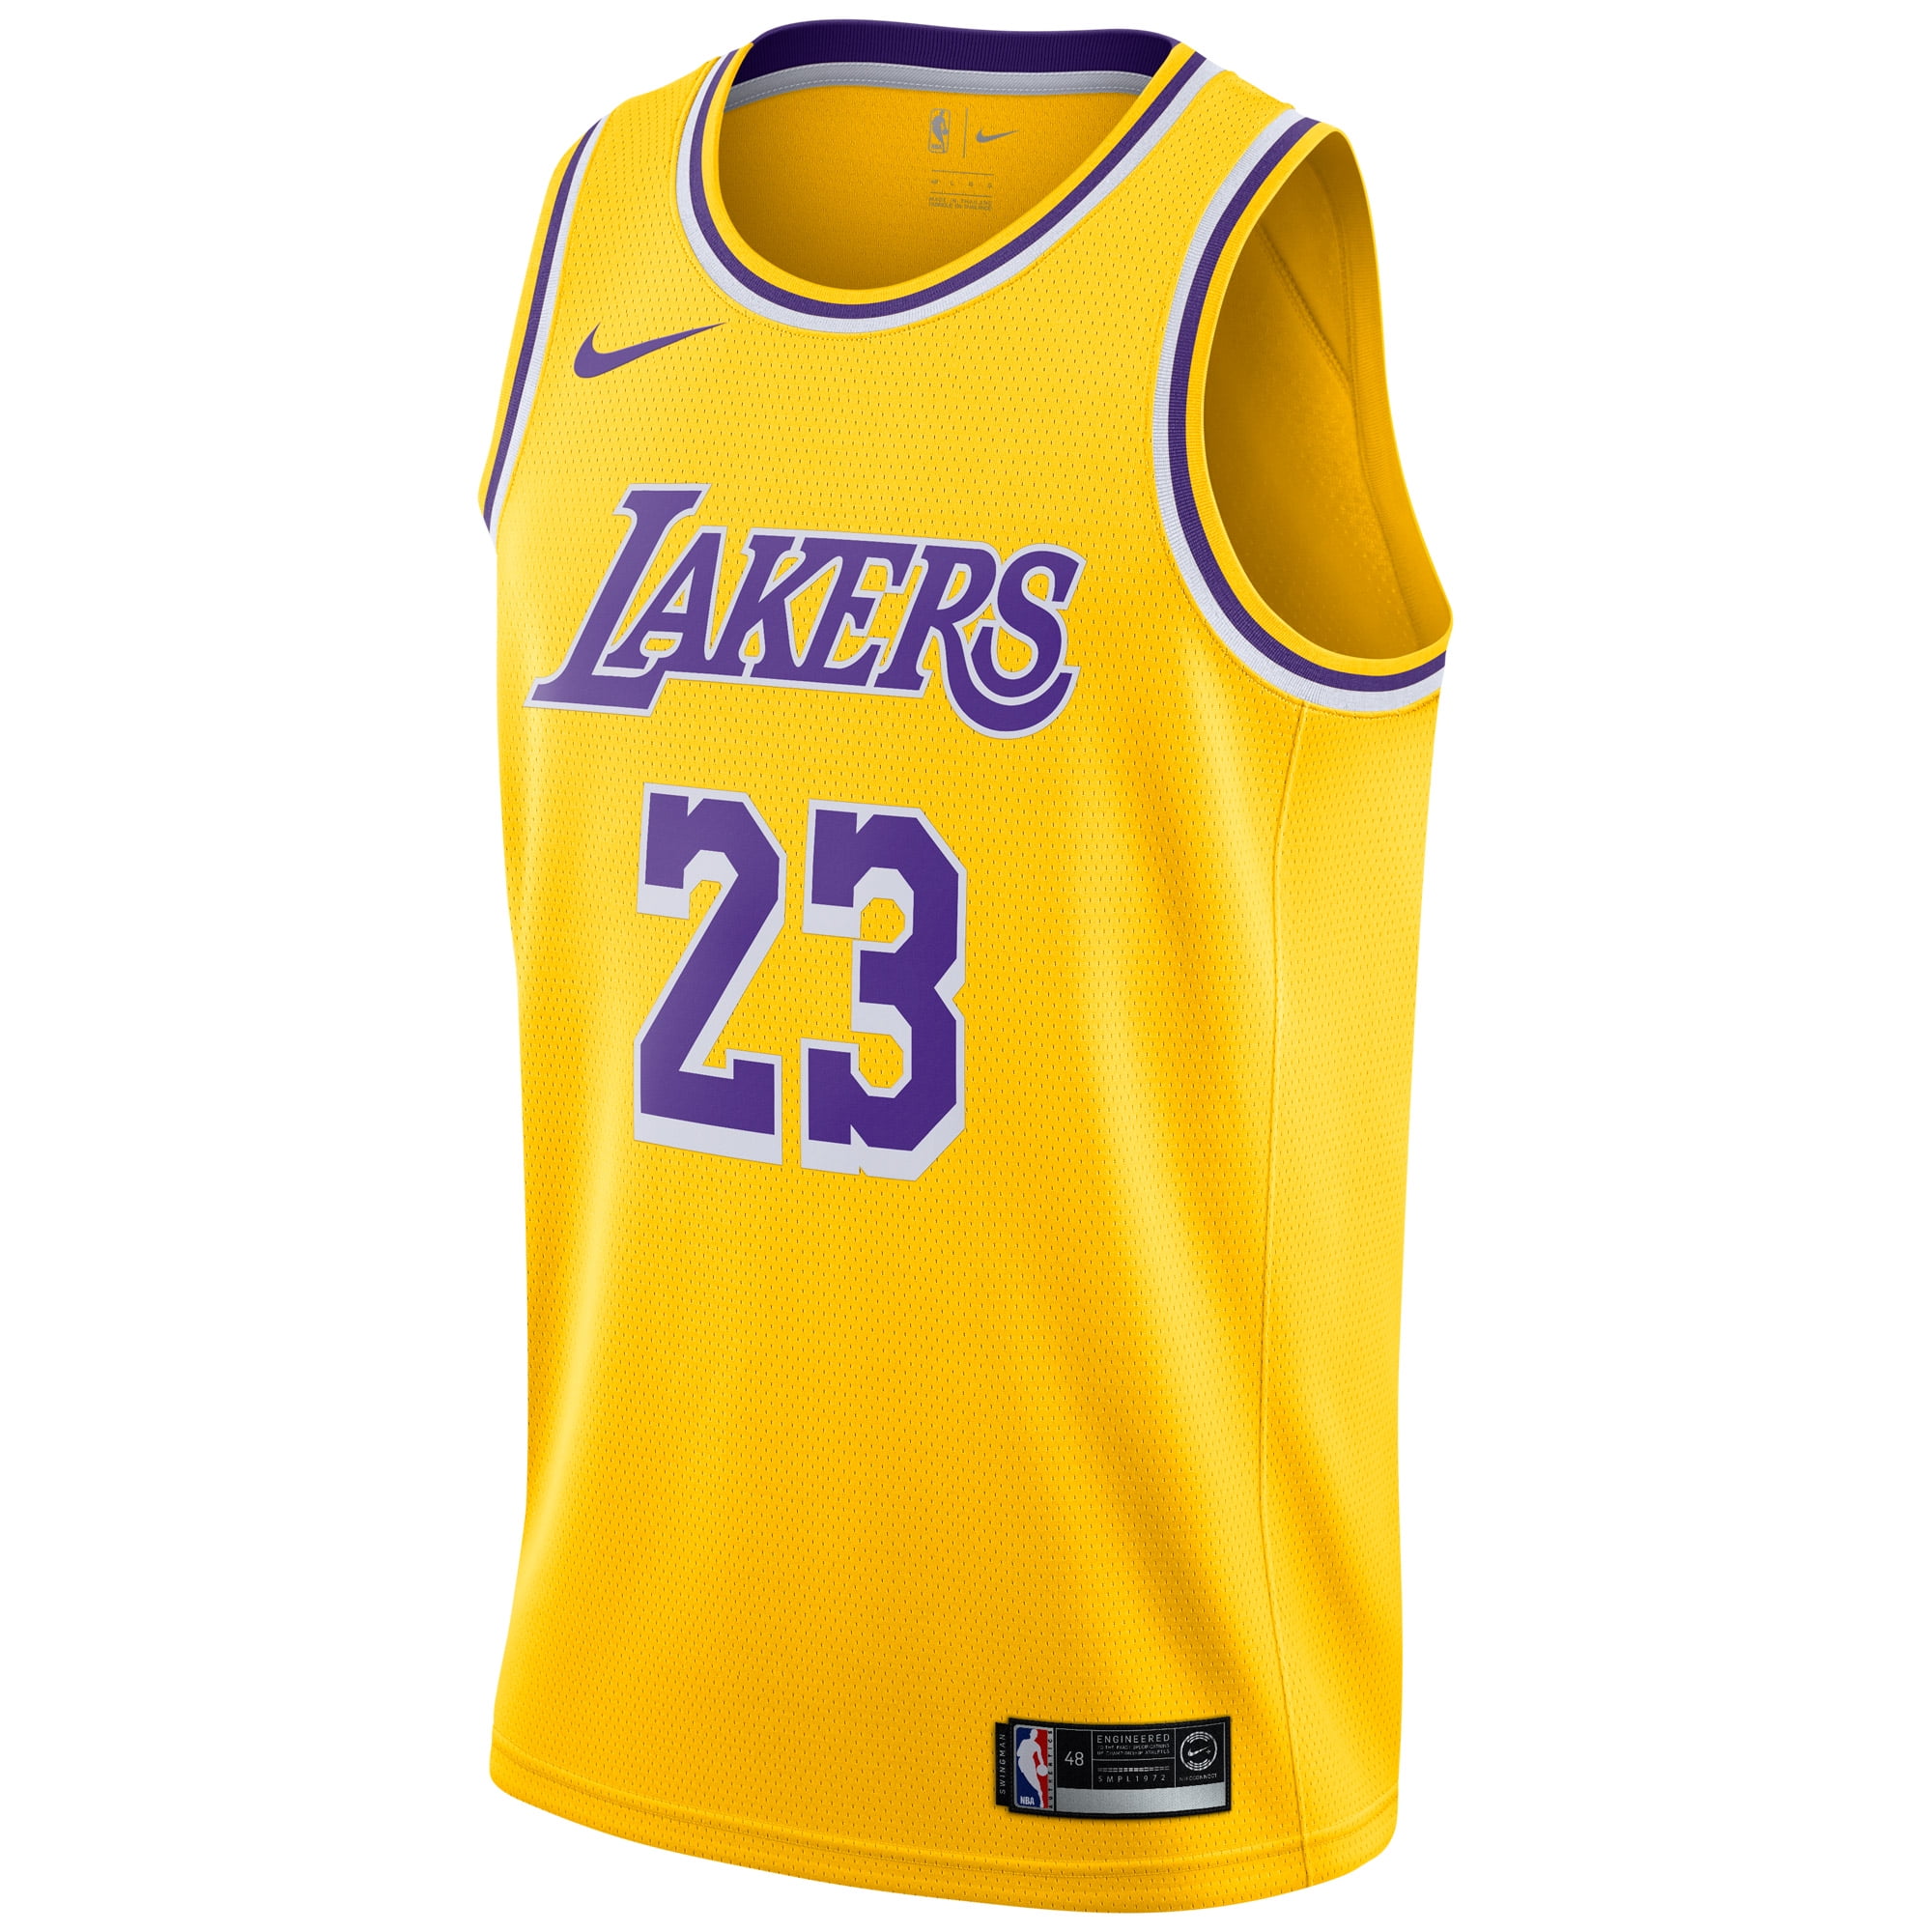 5t lakers jersey